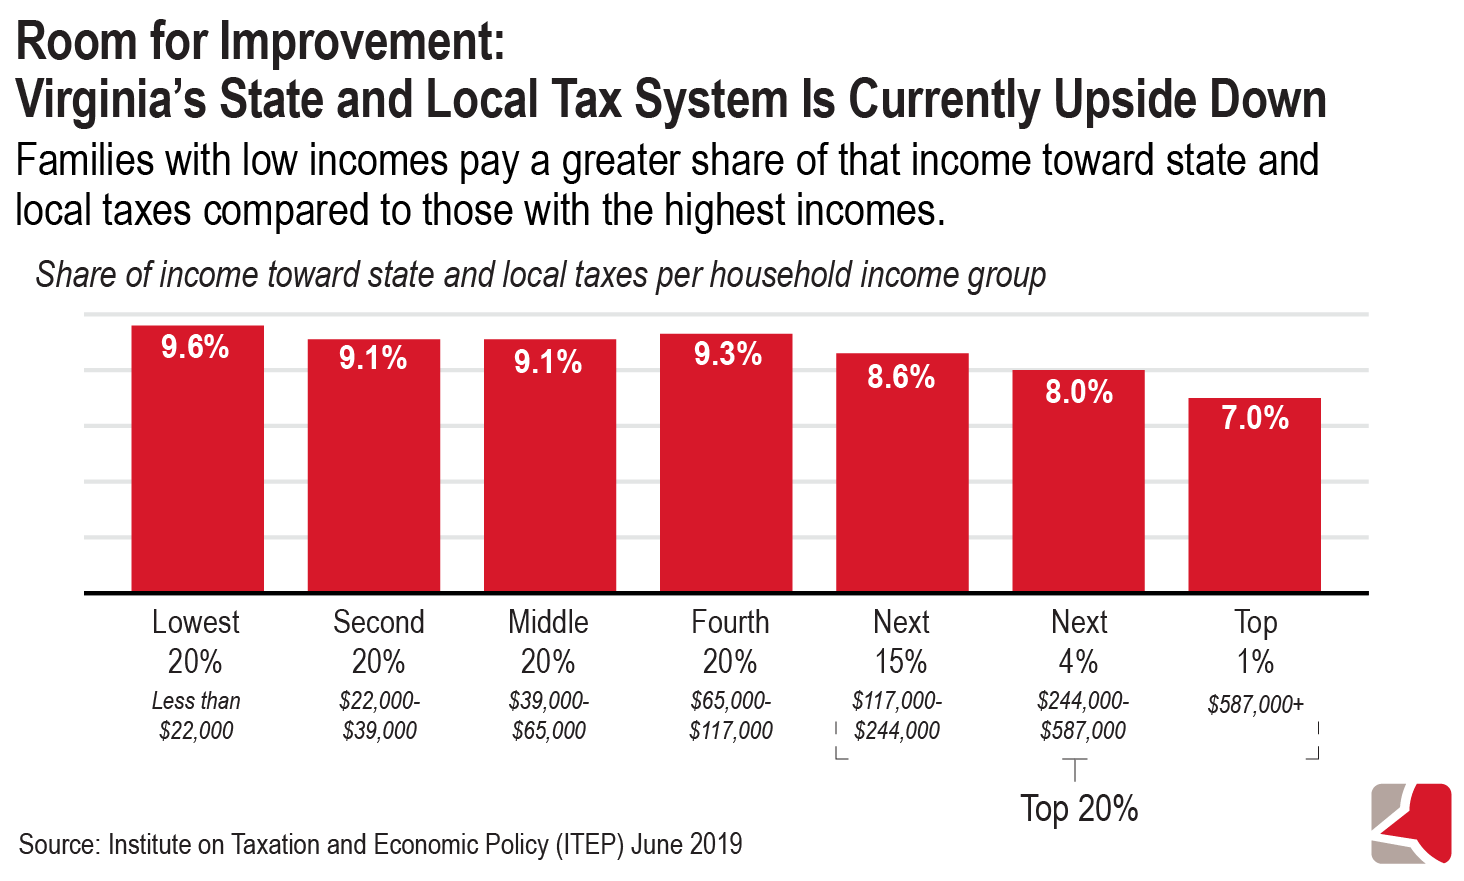 Bar graph showing that Virginia's state and local tax system is upside down. Those in the lowest 20% bracket of household income pay 9.6 percent of their income toward state and local taxes, while the top 1 percent pay just 7 percent of their income toward state and local taxes